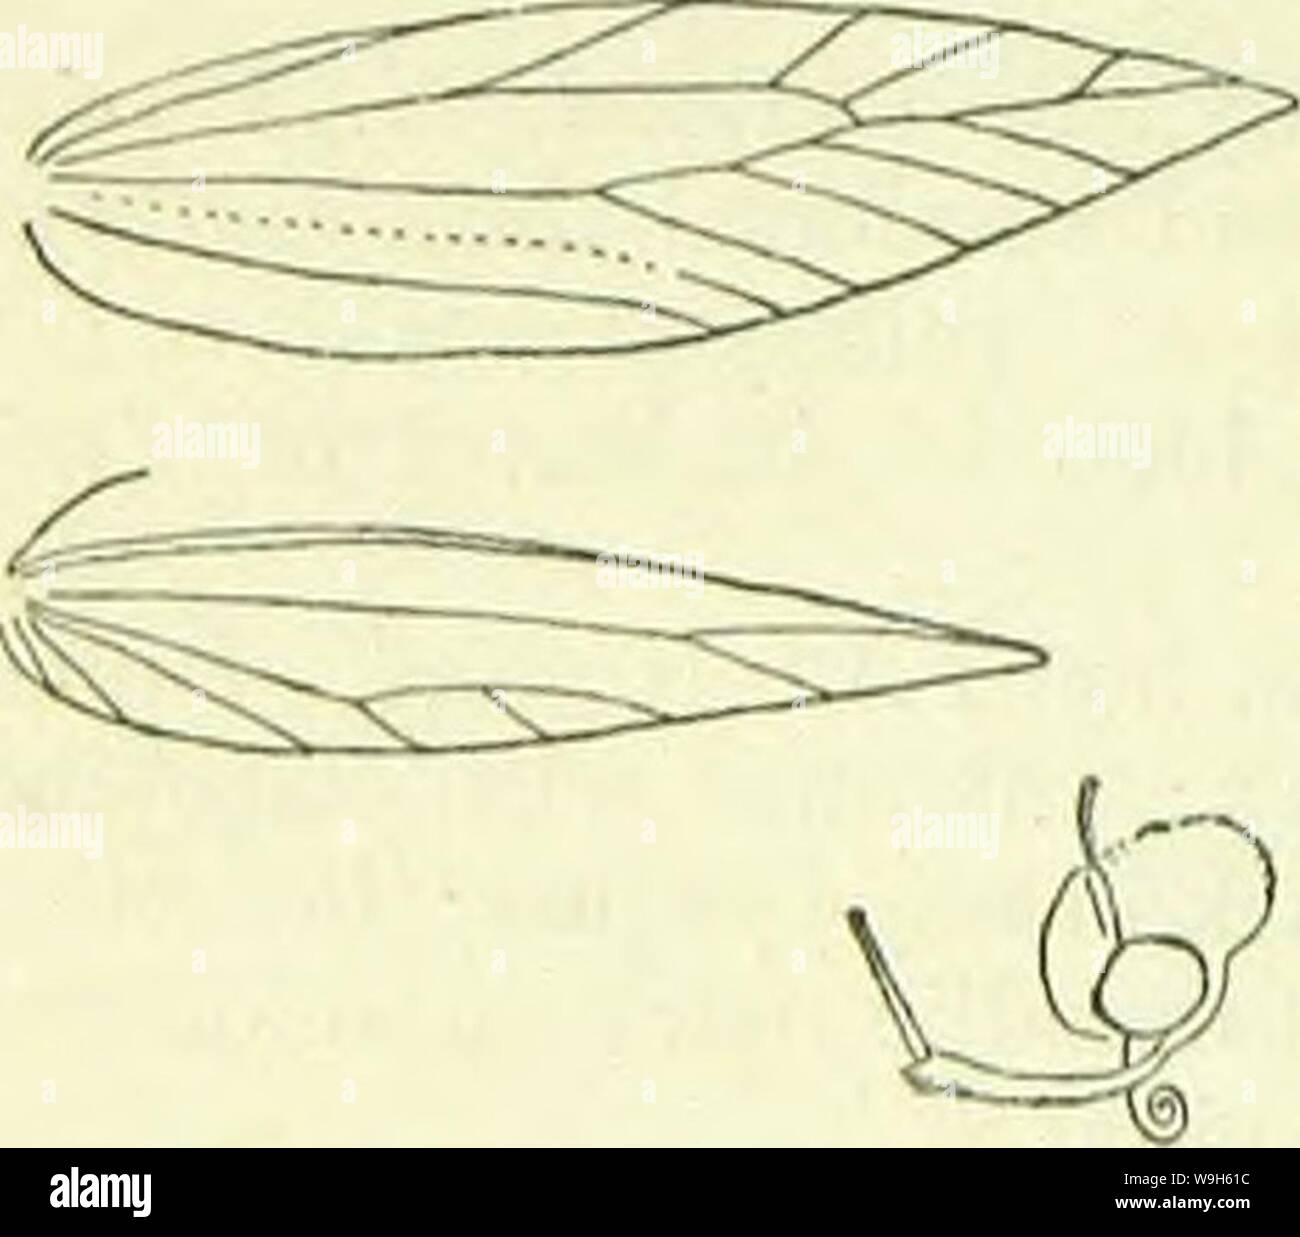 Archive image from page 673 of A handbook of British lepidoptera. A handbook of British lepidoptera  CUbiodiversity1126142 Year: 1895 ( TINEINA [STATHMOPODA J, linear-lanceolate, cilia 6; transverse vein partly absent, G and 7 connate. A rather extensive genus, occurring especially in Australia, New Zealand, the Indo-Malayan and African regions; only two species have been found in Europe. Larva feeding in fruits or galls. Pupa in a silken cocoon. Imago with forewings narrow, broadest near base, long-pointed. All the species in repose often carry the posterior legs semierect, projecting between Stock Photo